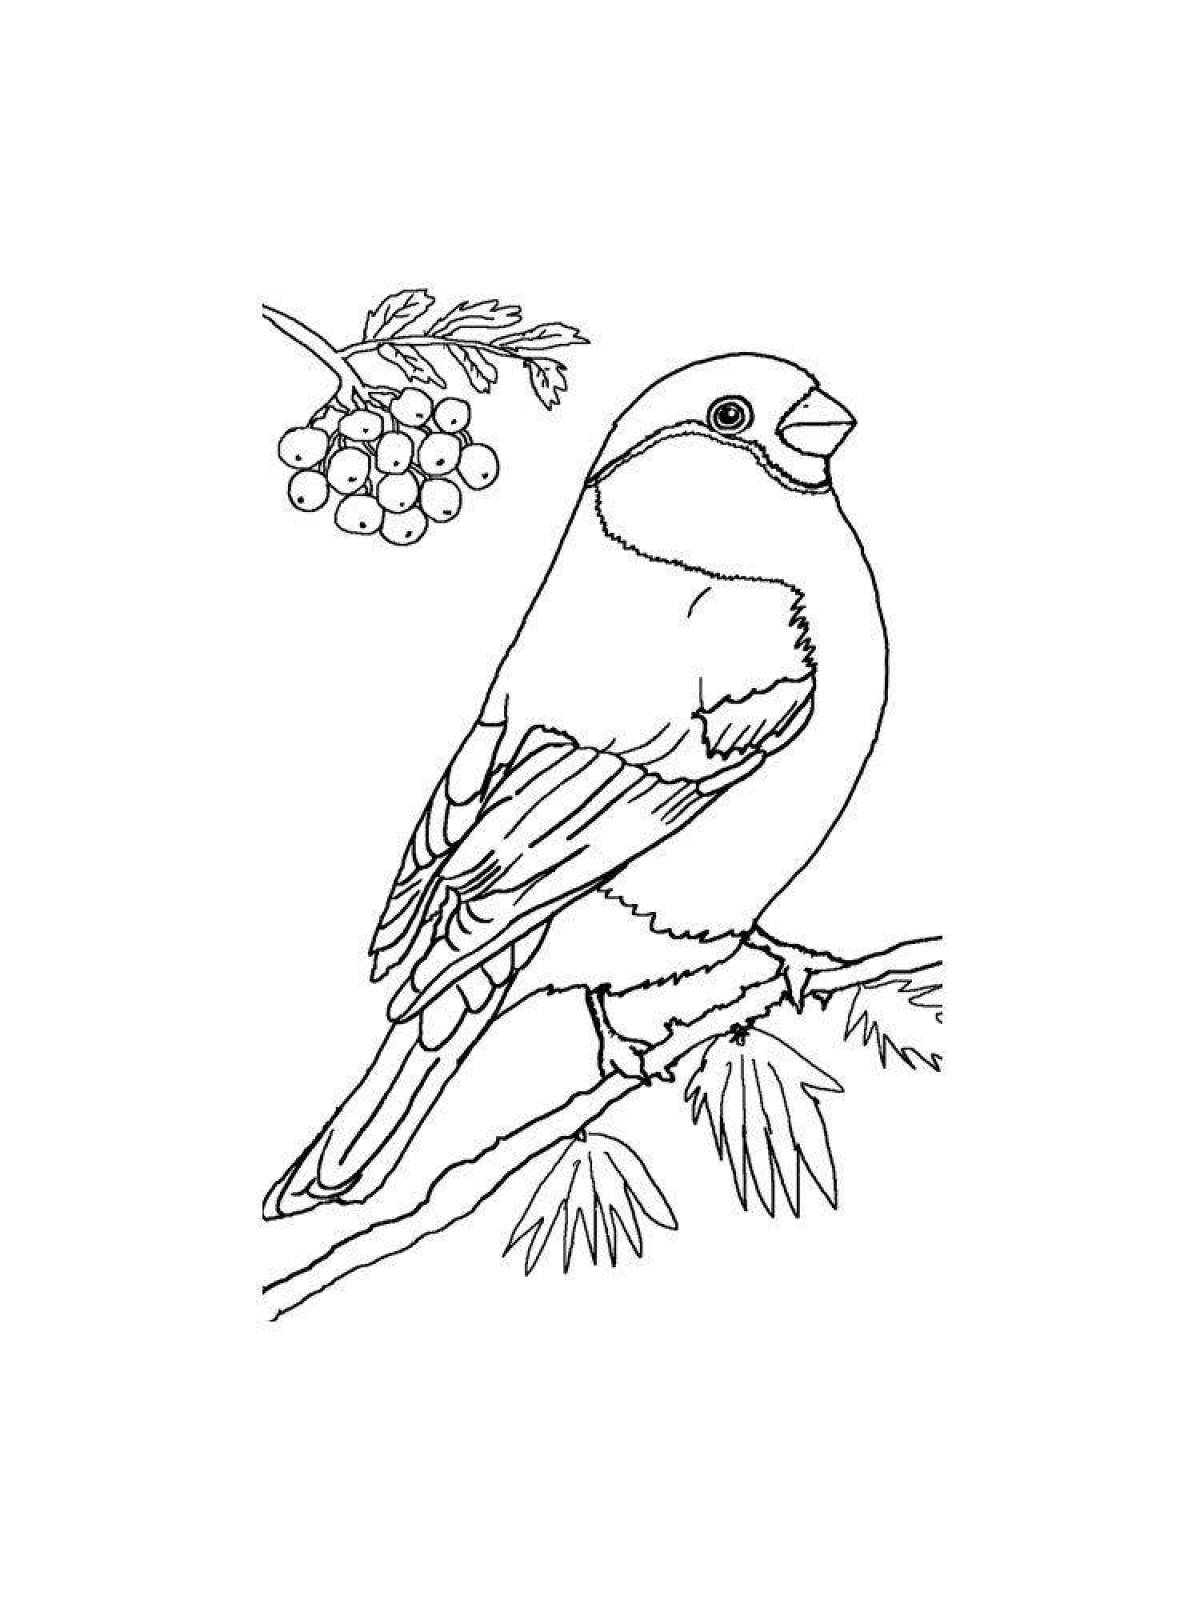 Exquisite drawing of a bullfinch